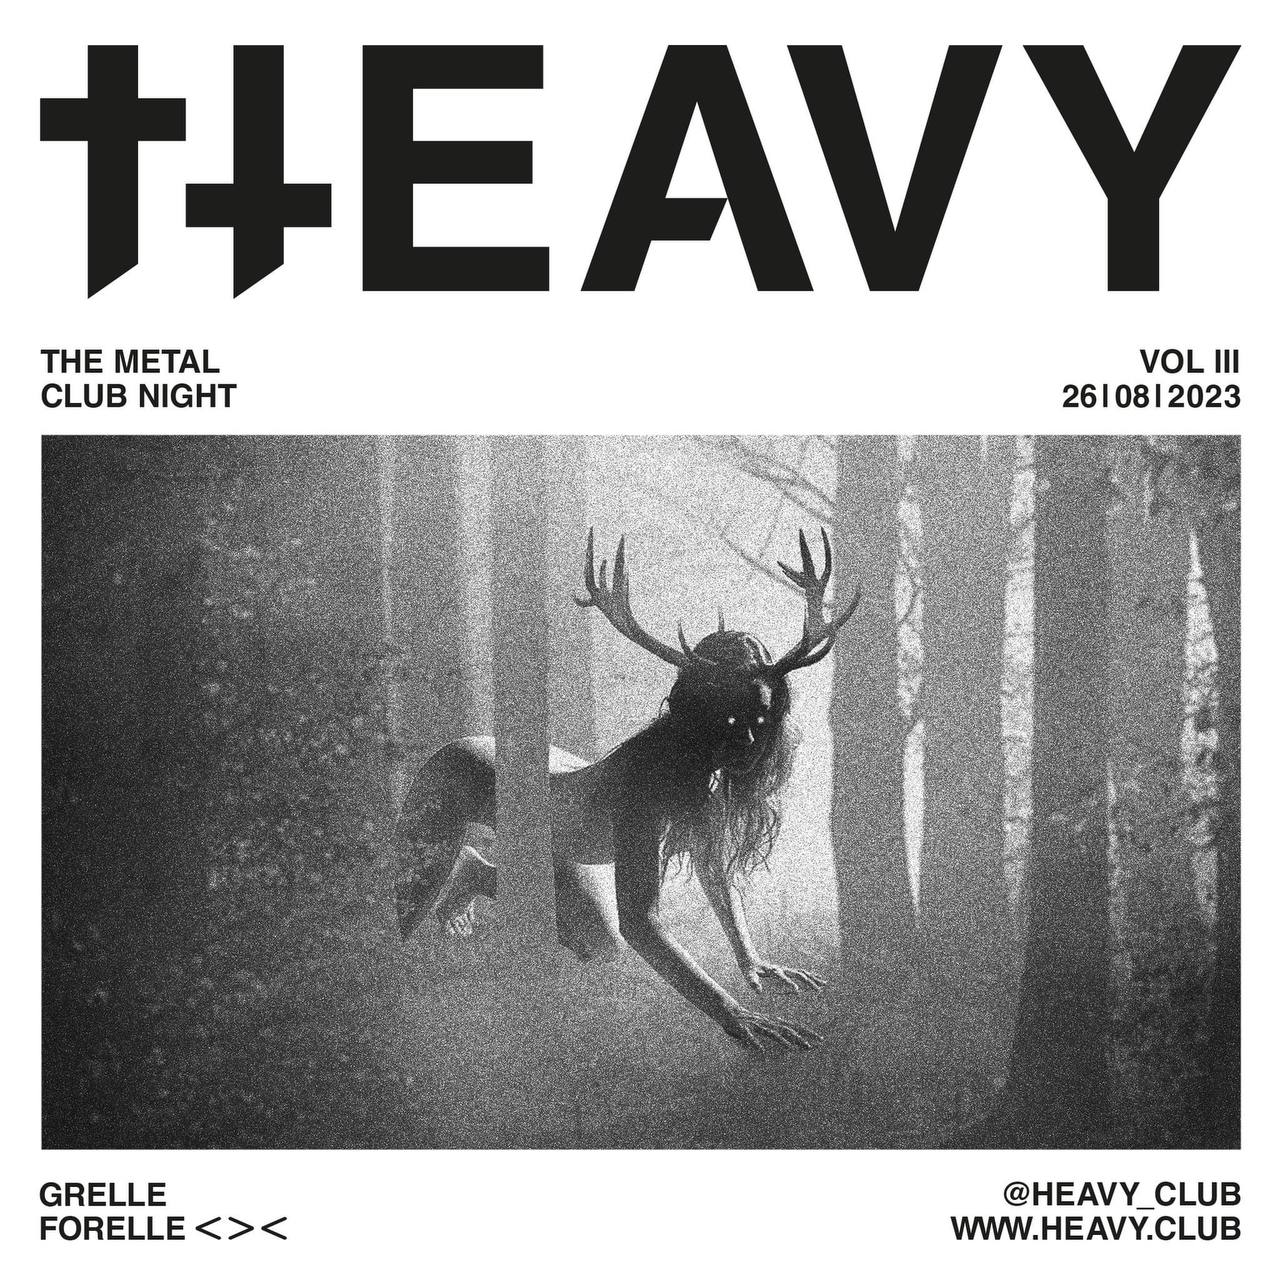 HEAVY - The Metal Club Night VOL 4 am 26. August 2023 @ Grelle Forelle.